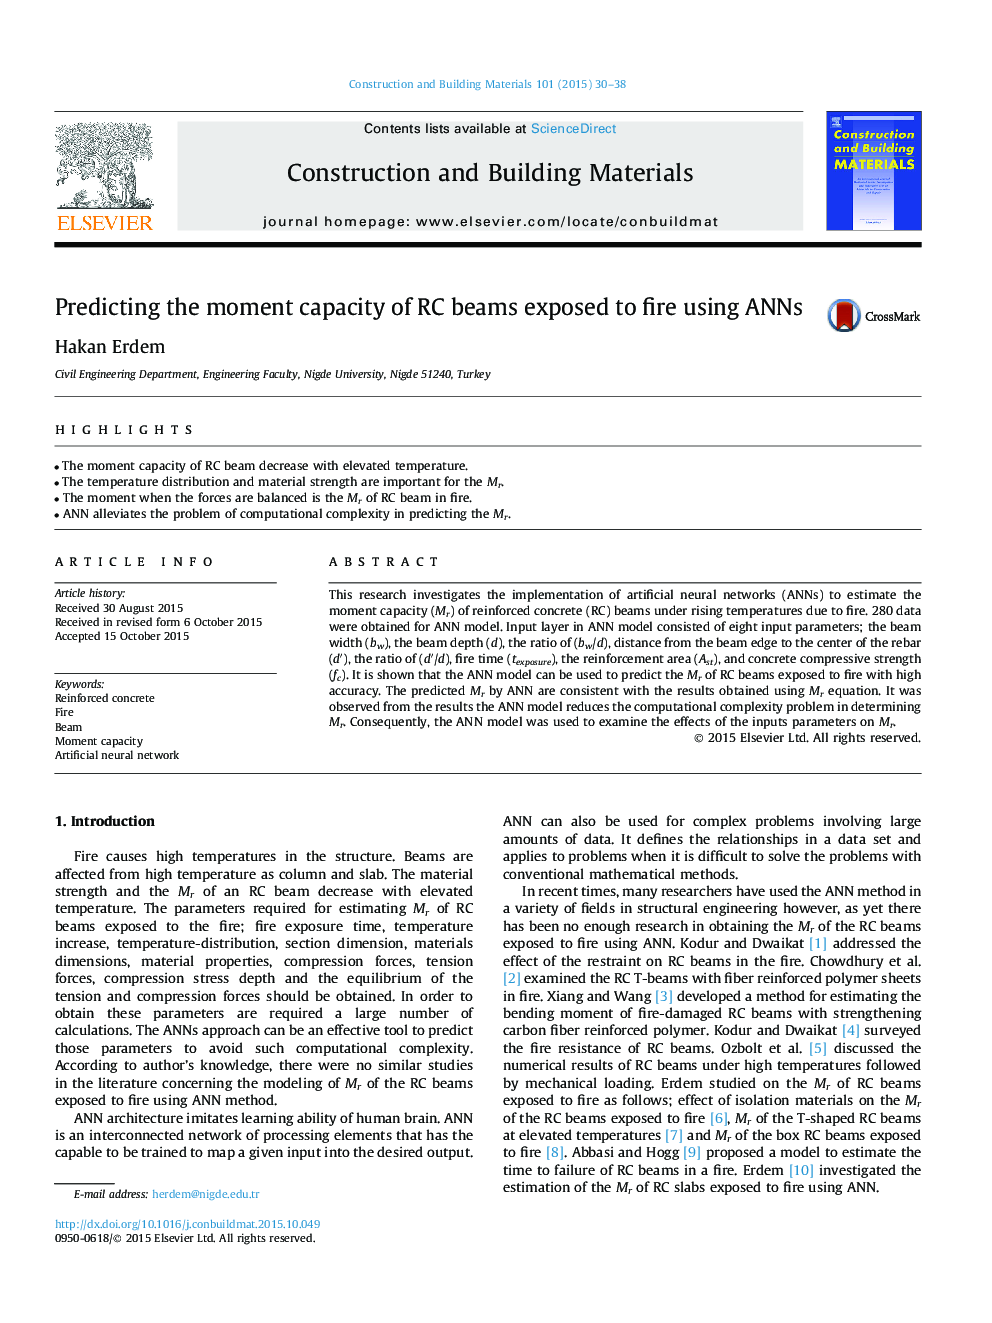 Predicting the moment capacity of RC beams exposed to fire using ANNs